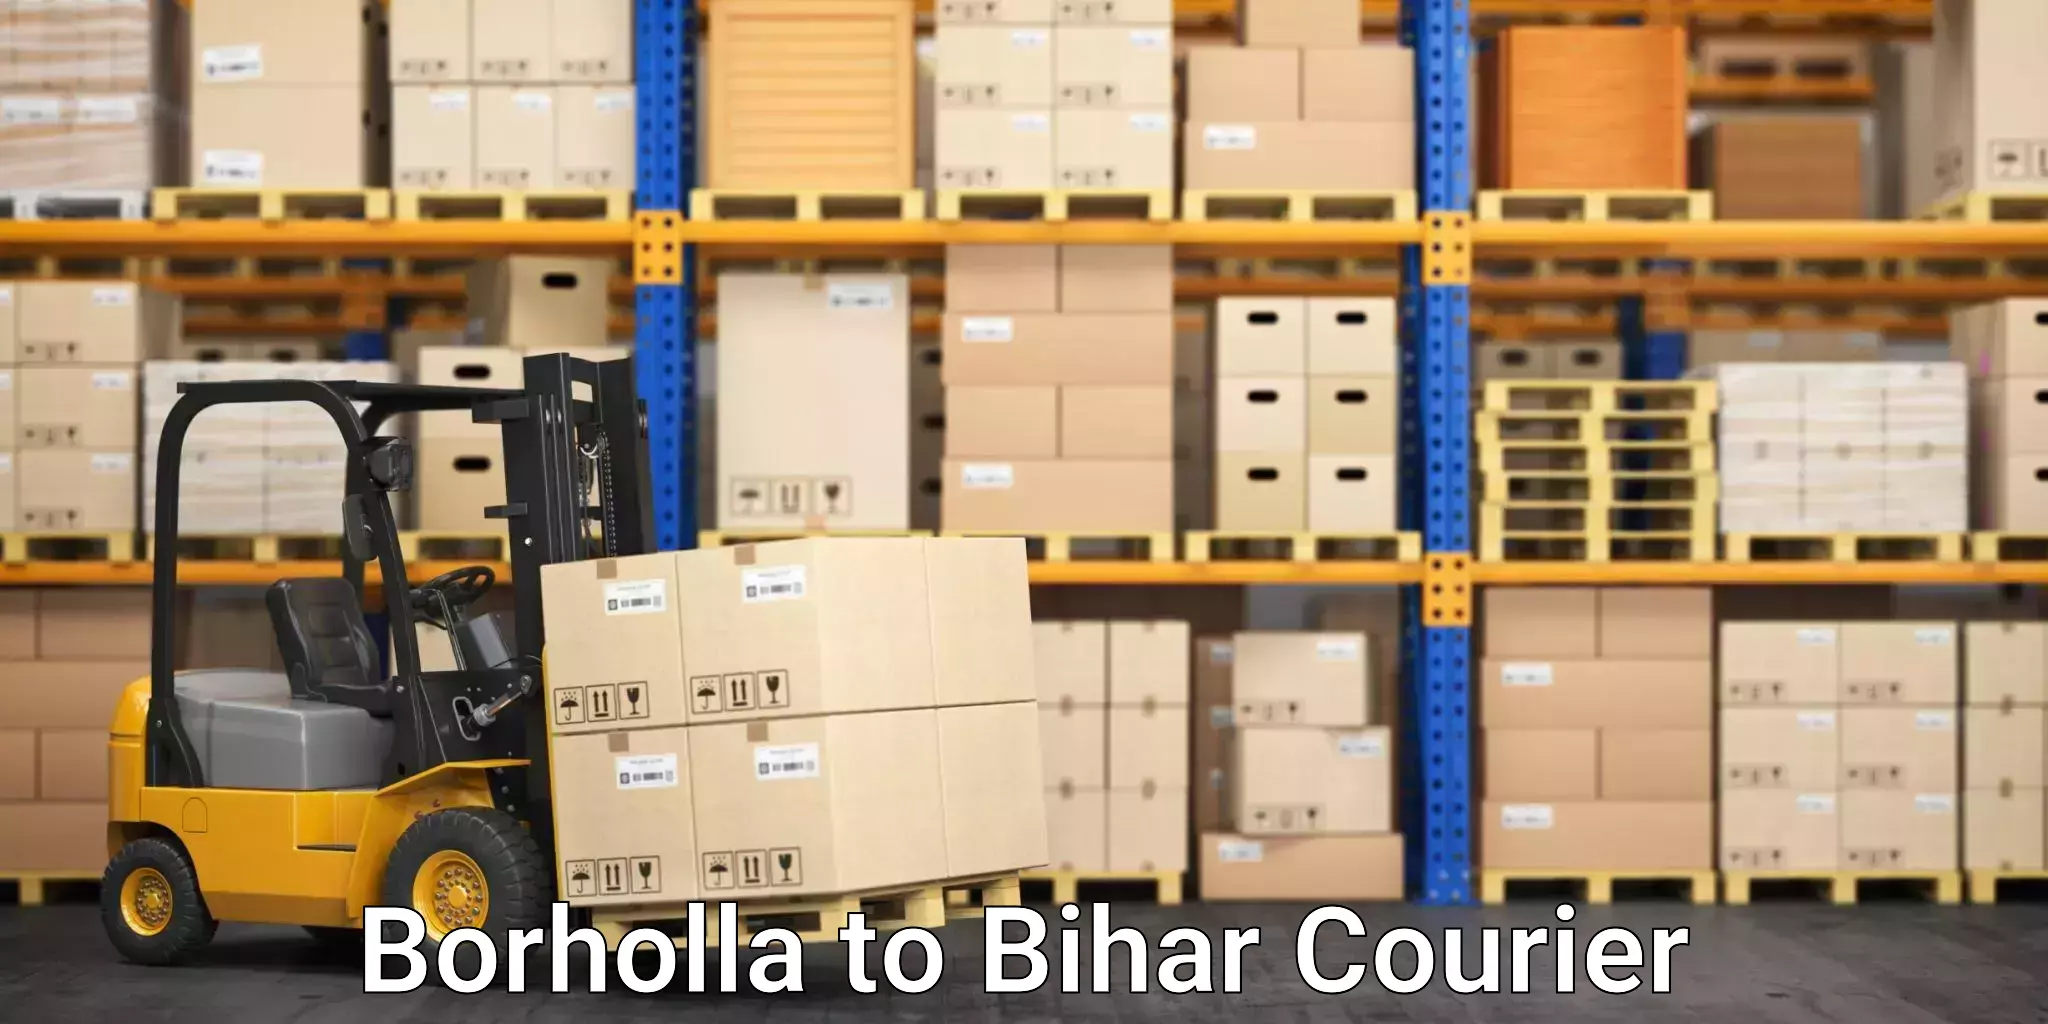 24-hour courier service Borholla to Fatwah